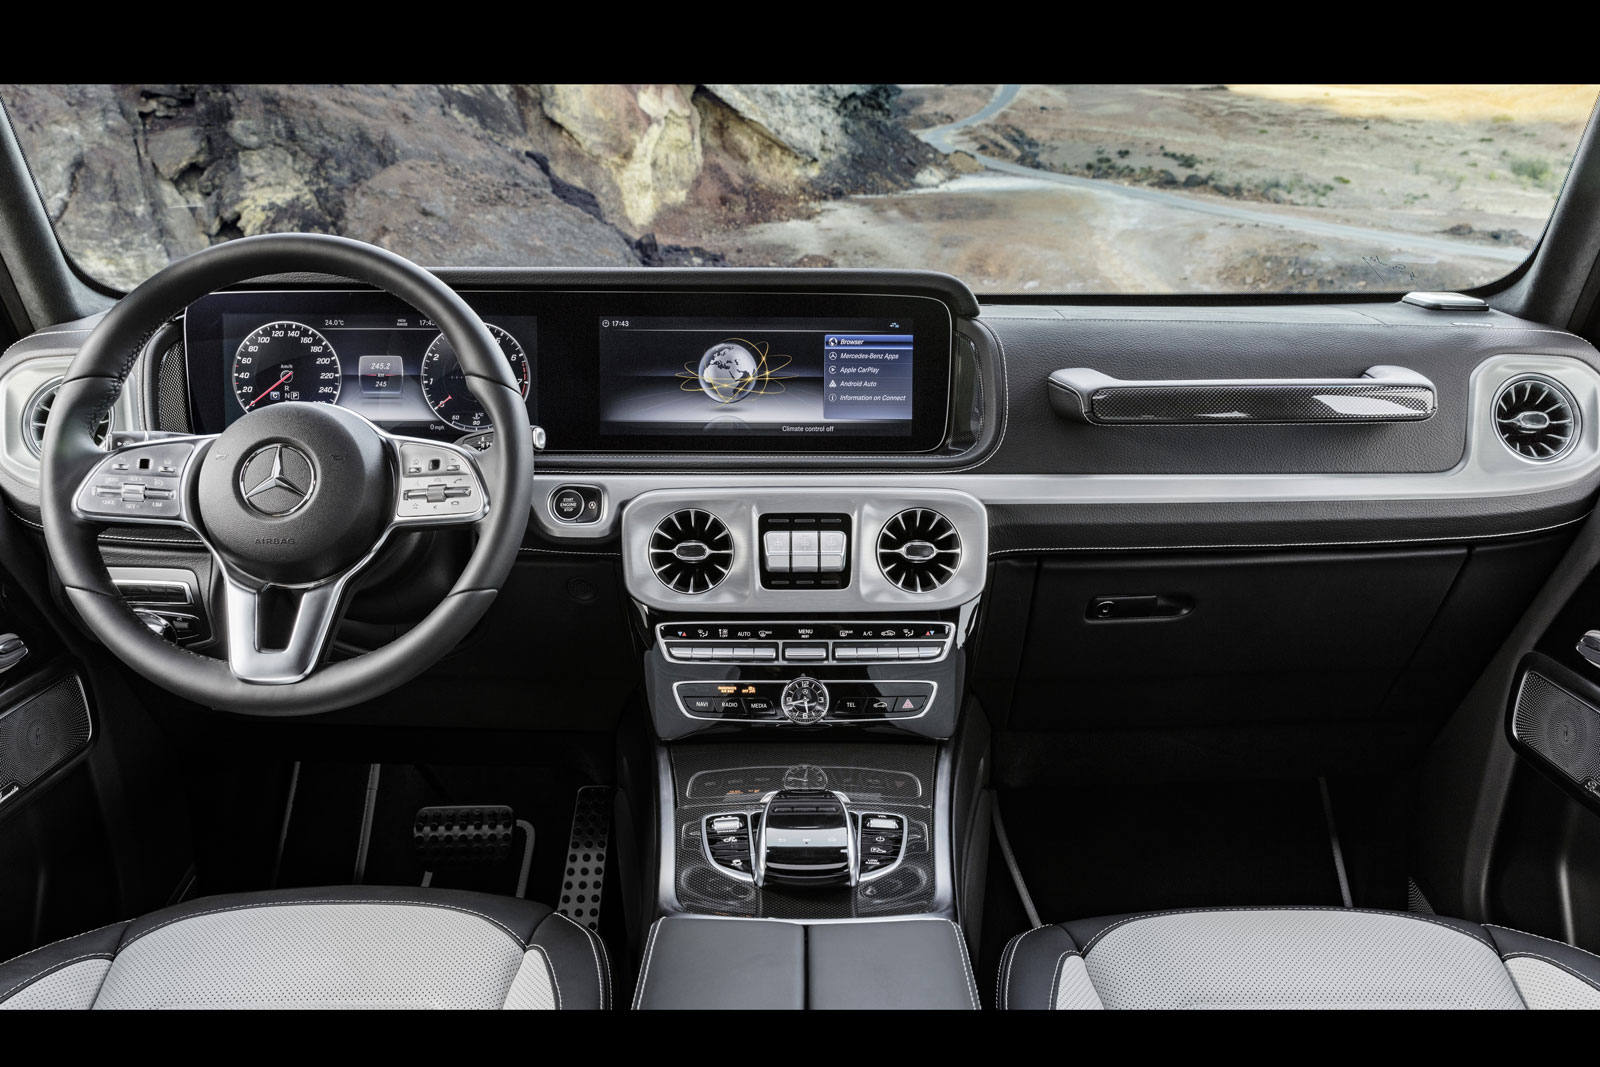 Mercedes Benz G Class Interior Revealed Ahead Of January Launch Autocar